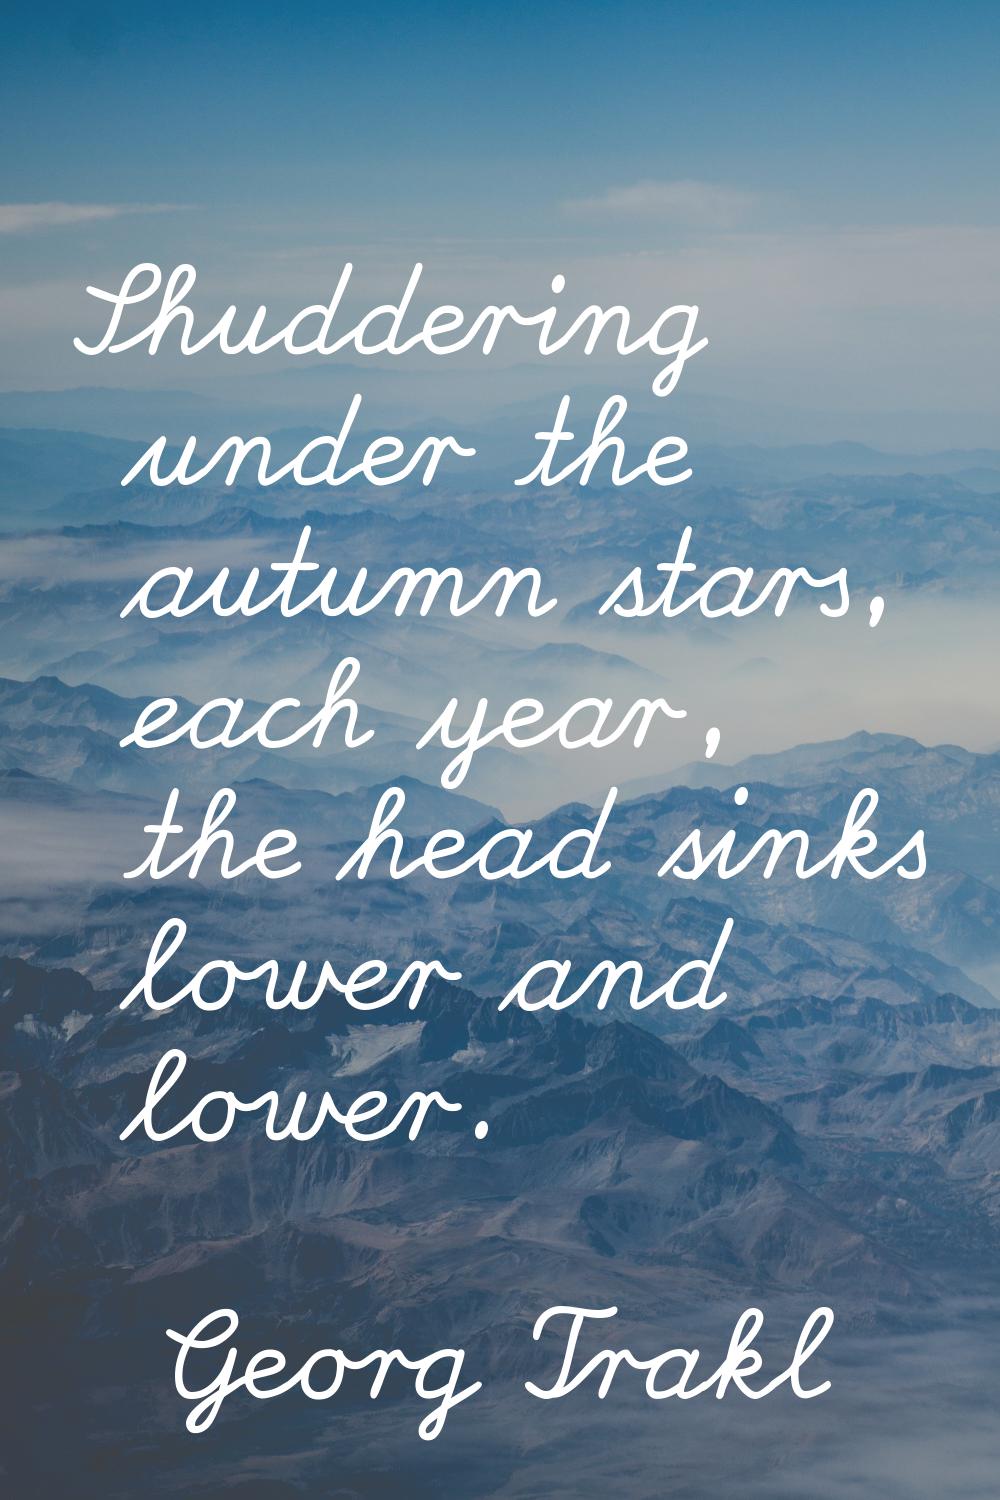 Shuddering under the autumn stars, each year, the head sinks lower and lower.